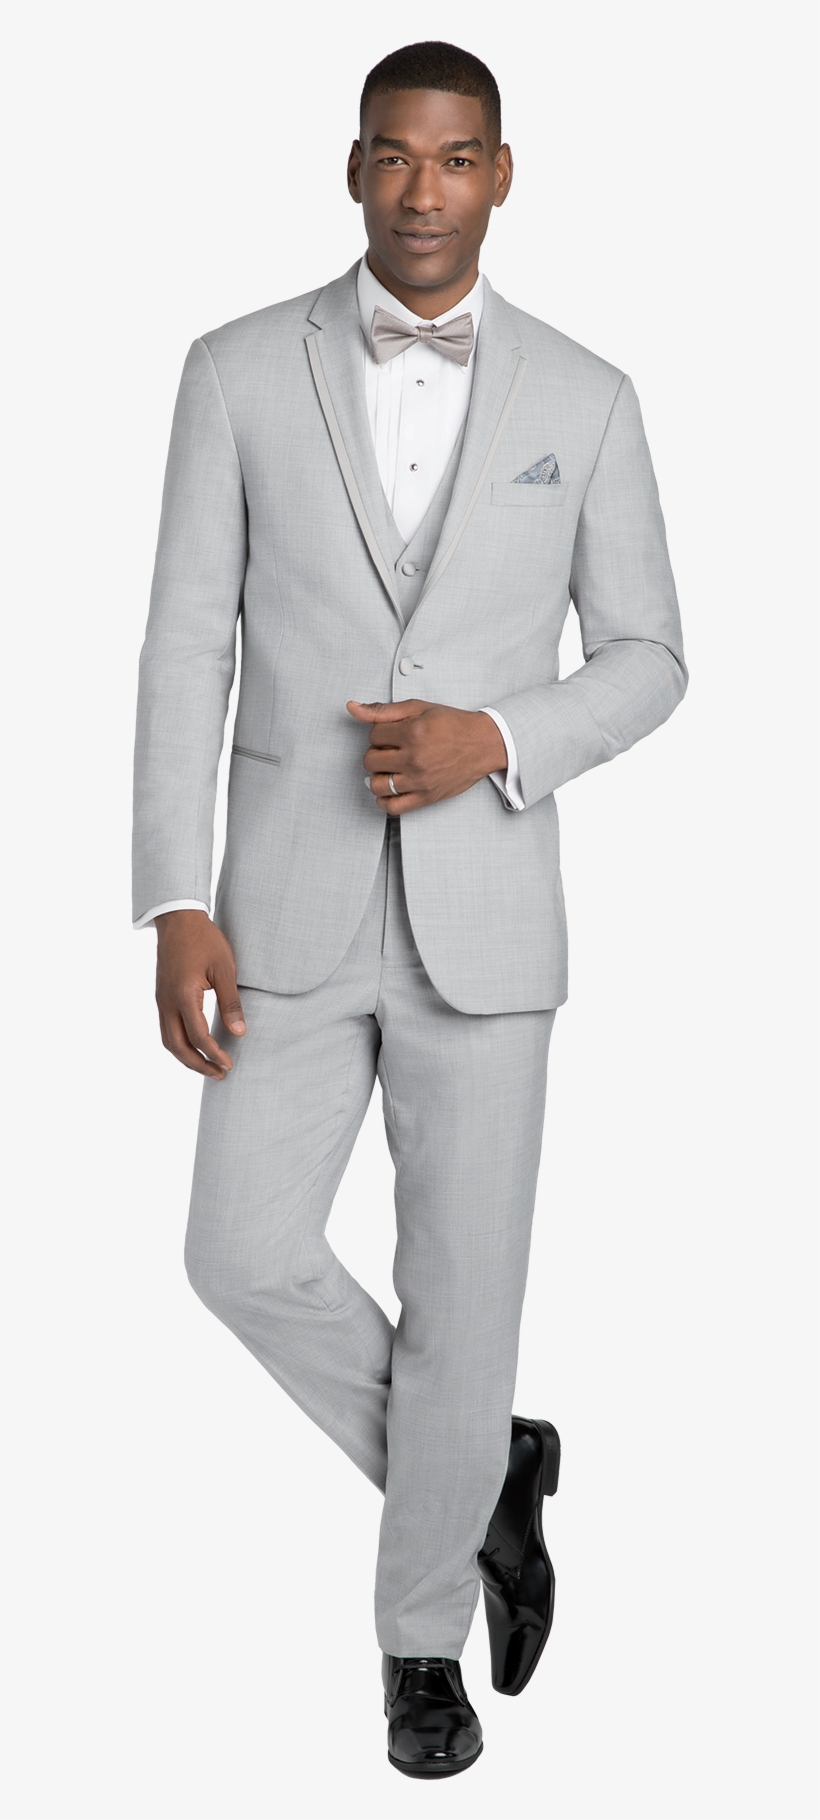 White Suit Png - Formal Attire For Men Head To Toe, transparent png #2158320